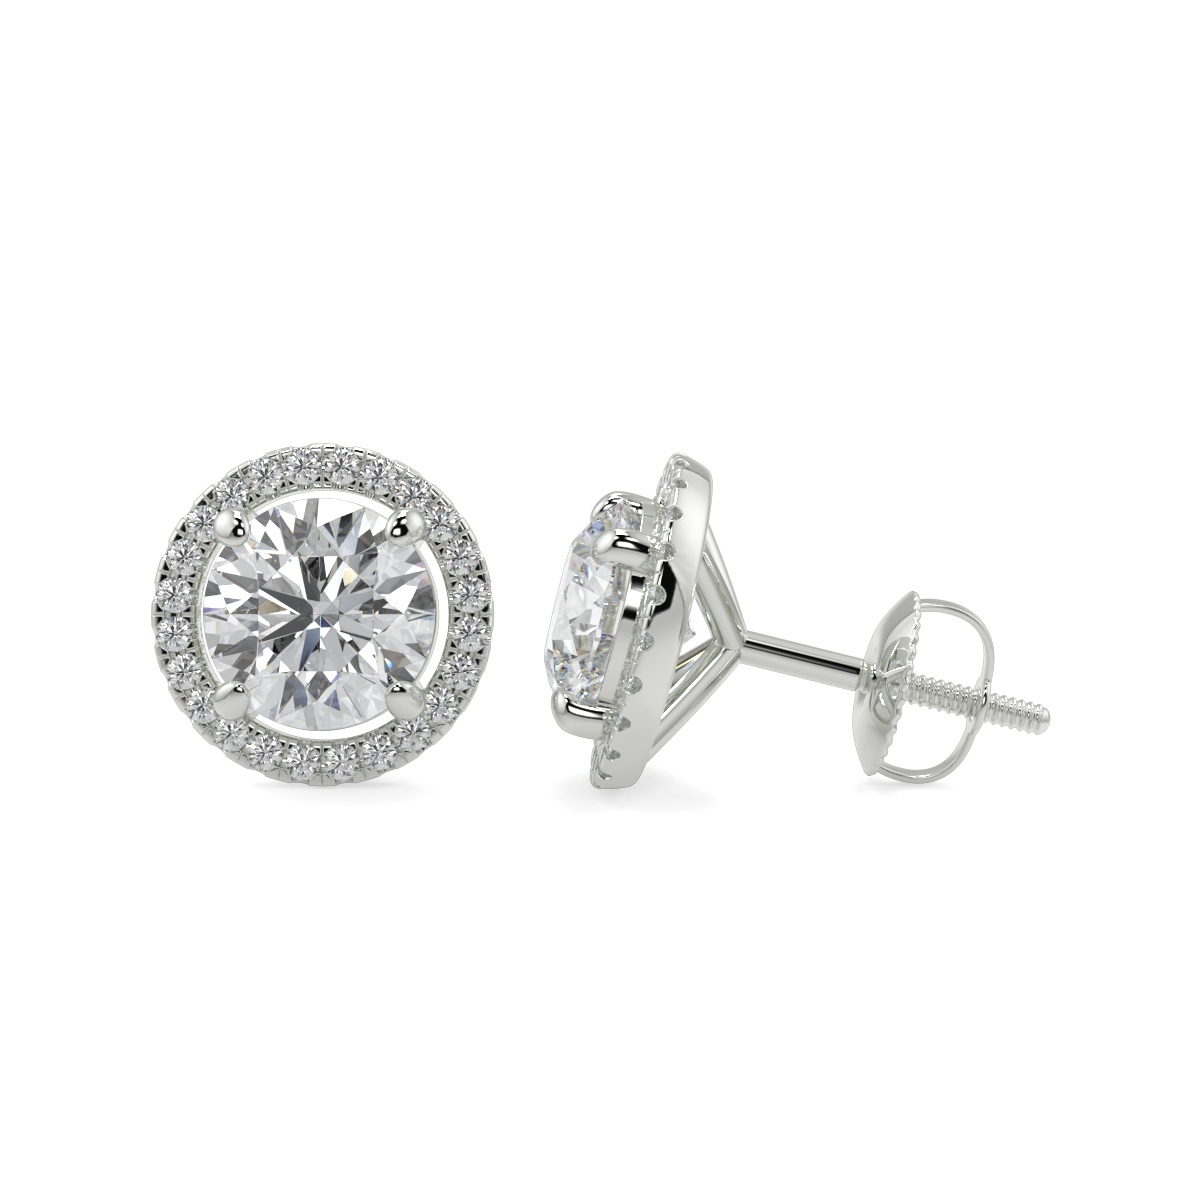 Checkout Our Latest Collection of Halo Diamond Earrings, Hatton Garden, London, United Kingdom